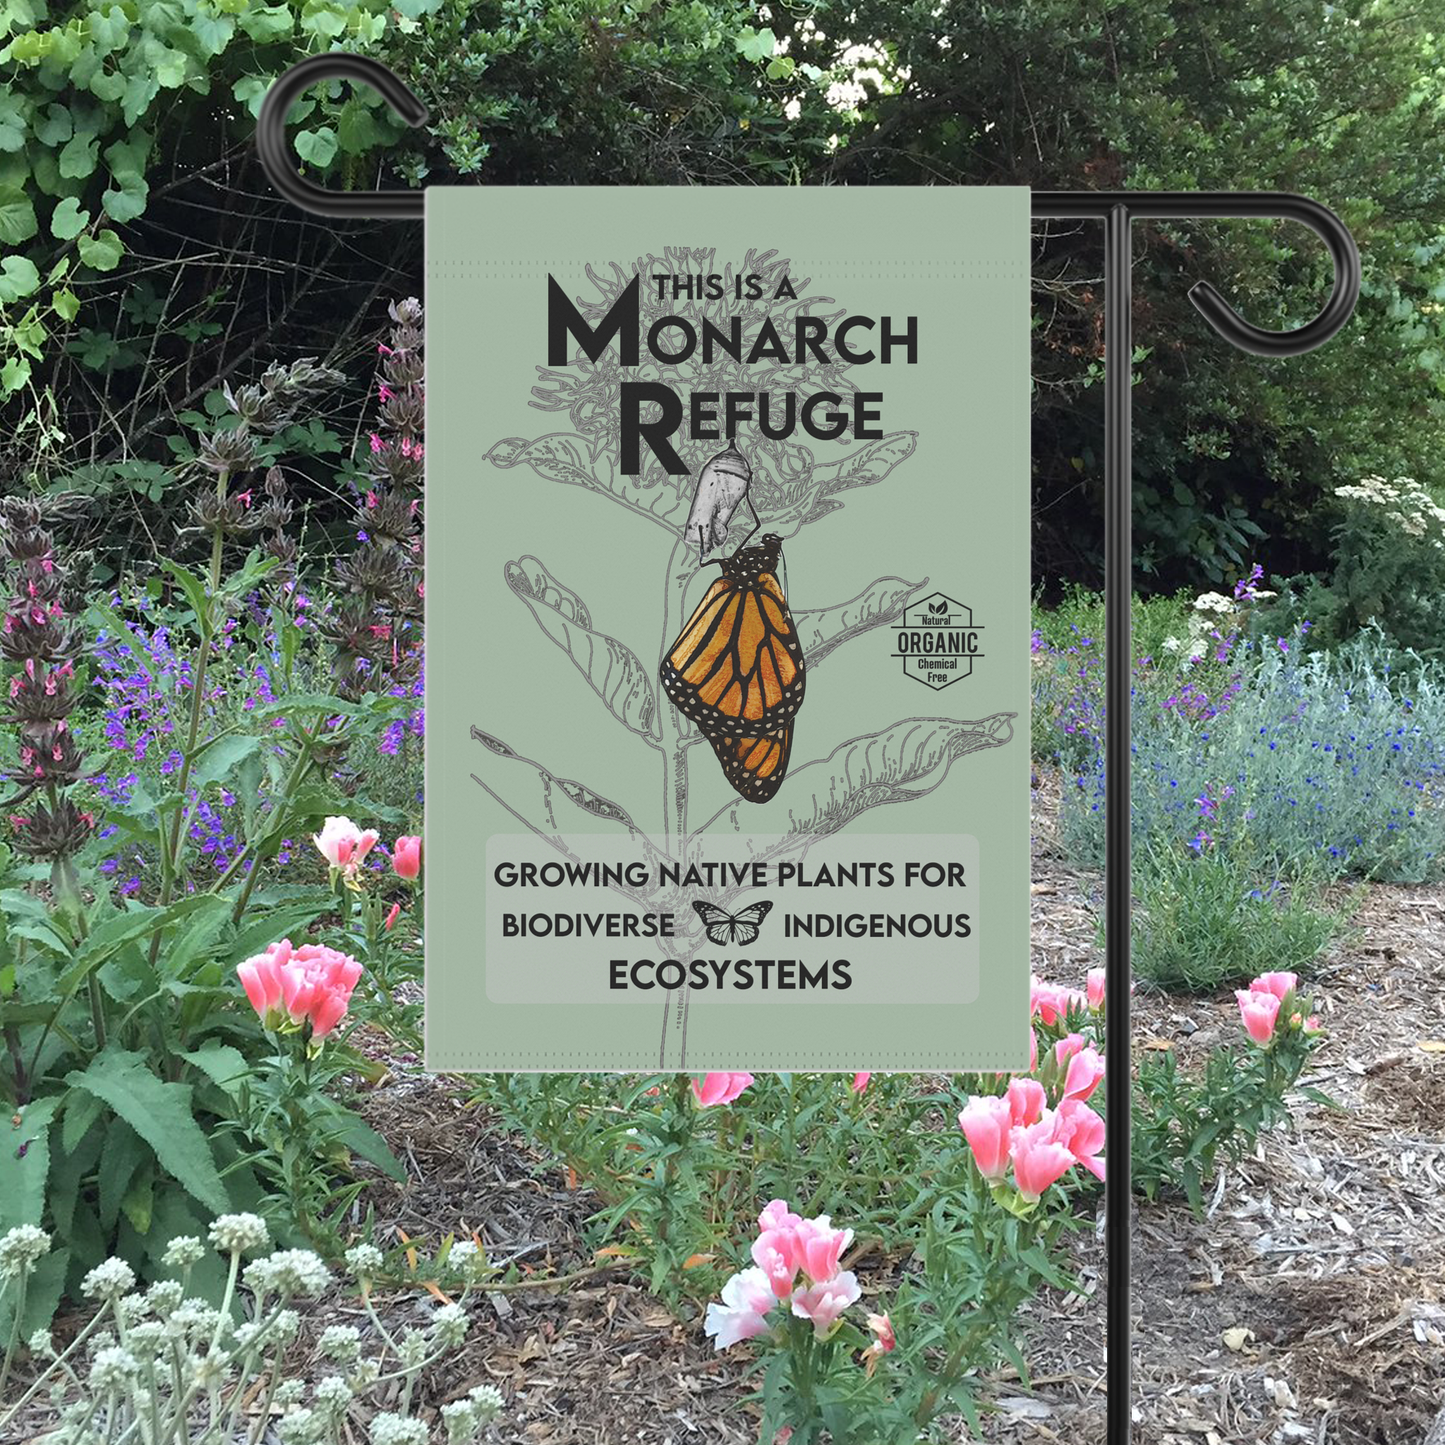 Monarch Refuge Garden & House Banner, Save the Monarchs native plant banner. Educational sign to help encourage Monarch conservation